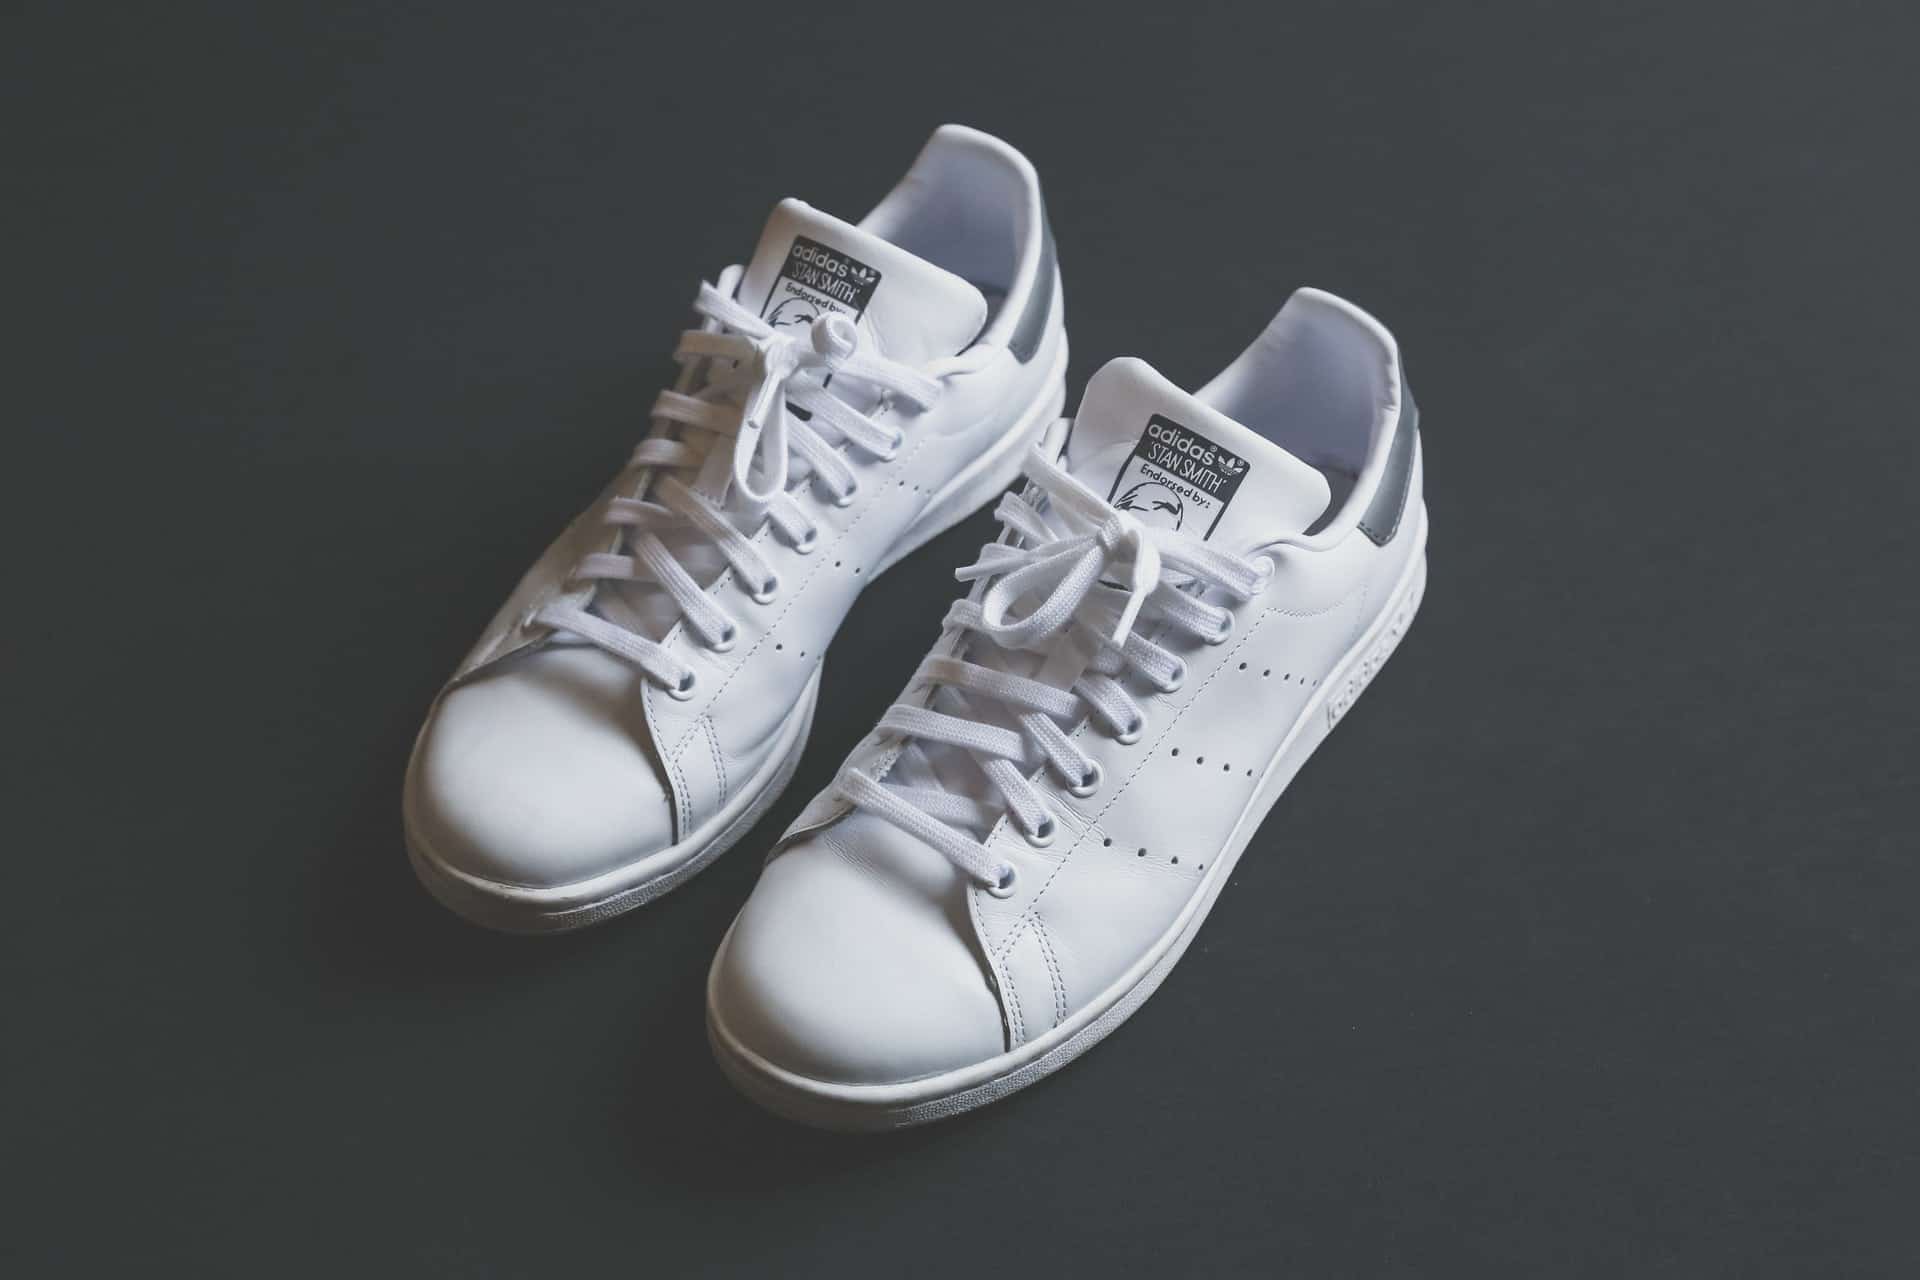 How to take care of white sneakers?